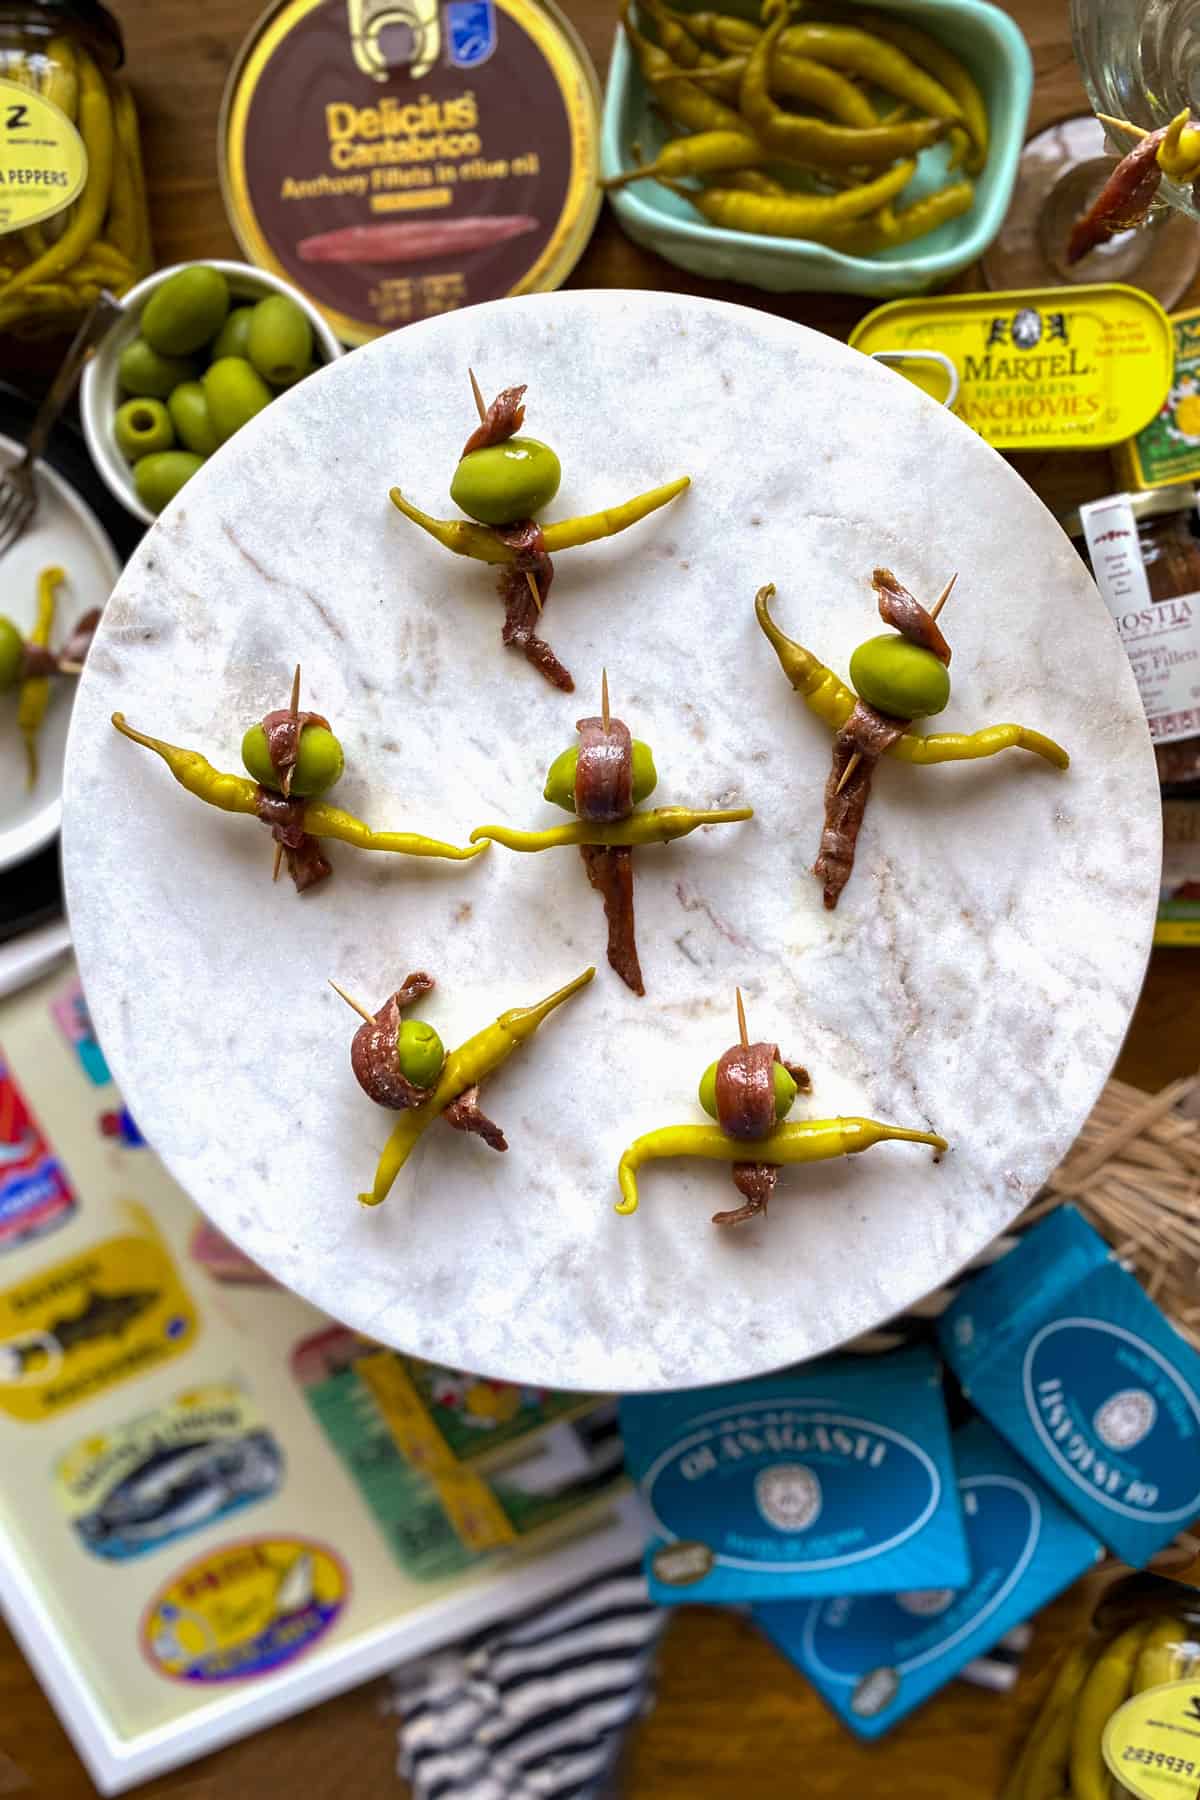 Six anchovy, olive and guindilla pepper skewers on a marble cake stand with a background of tinned seafood